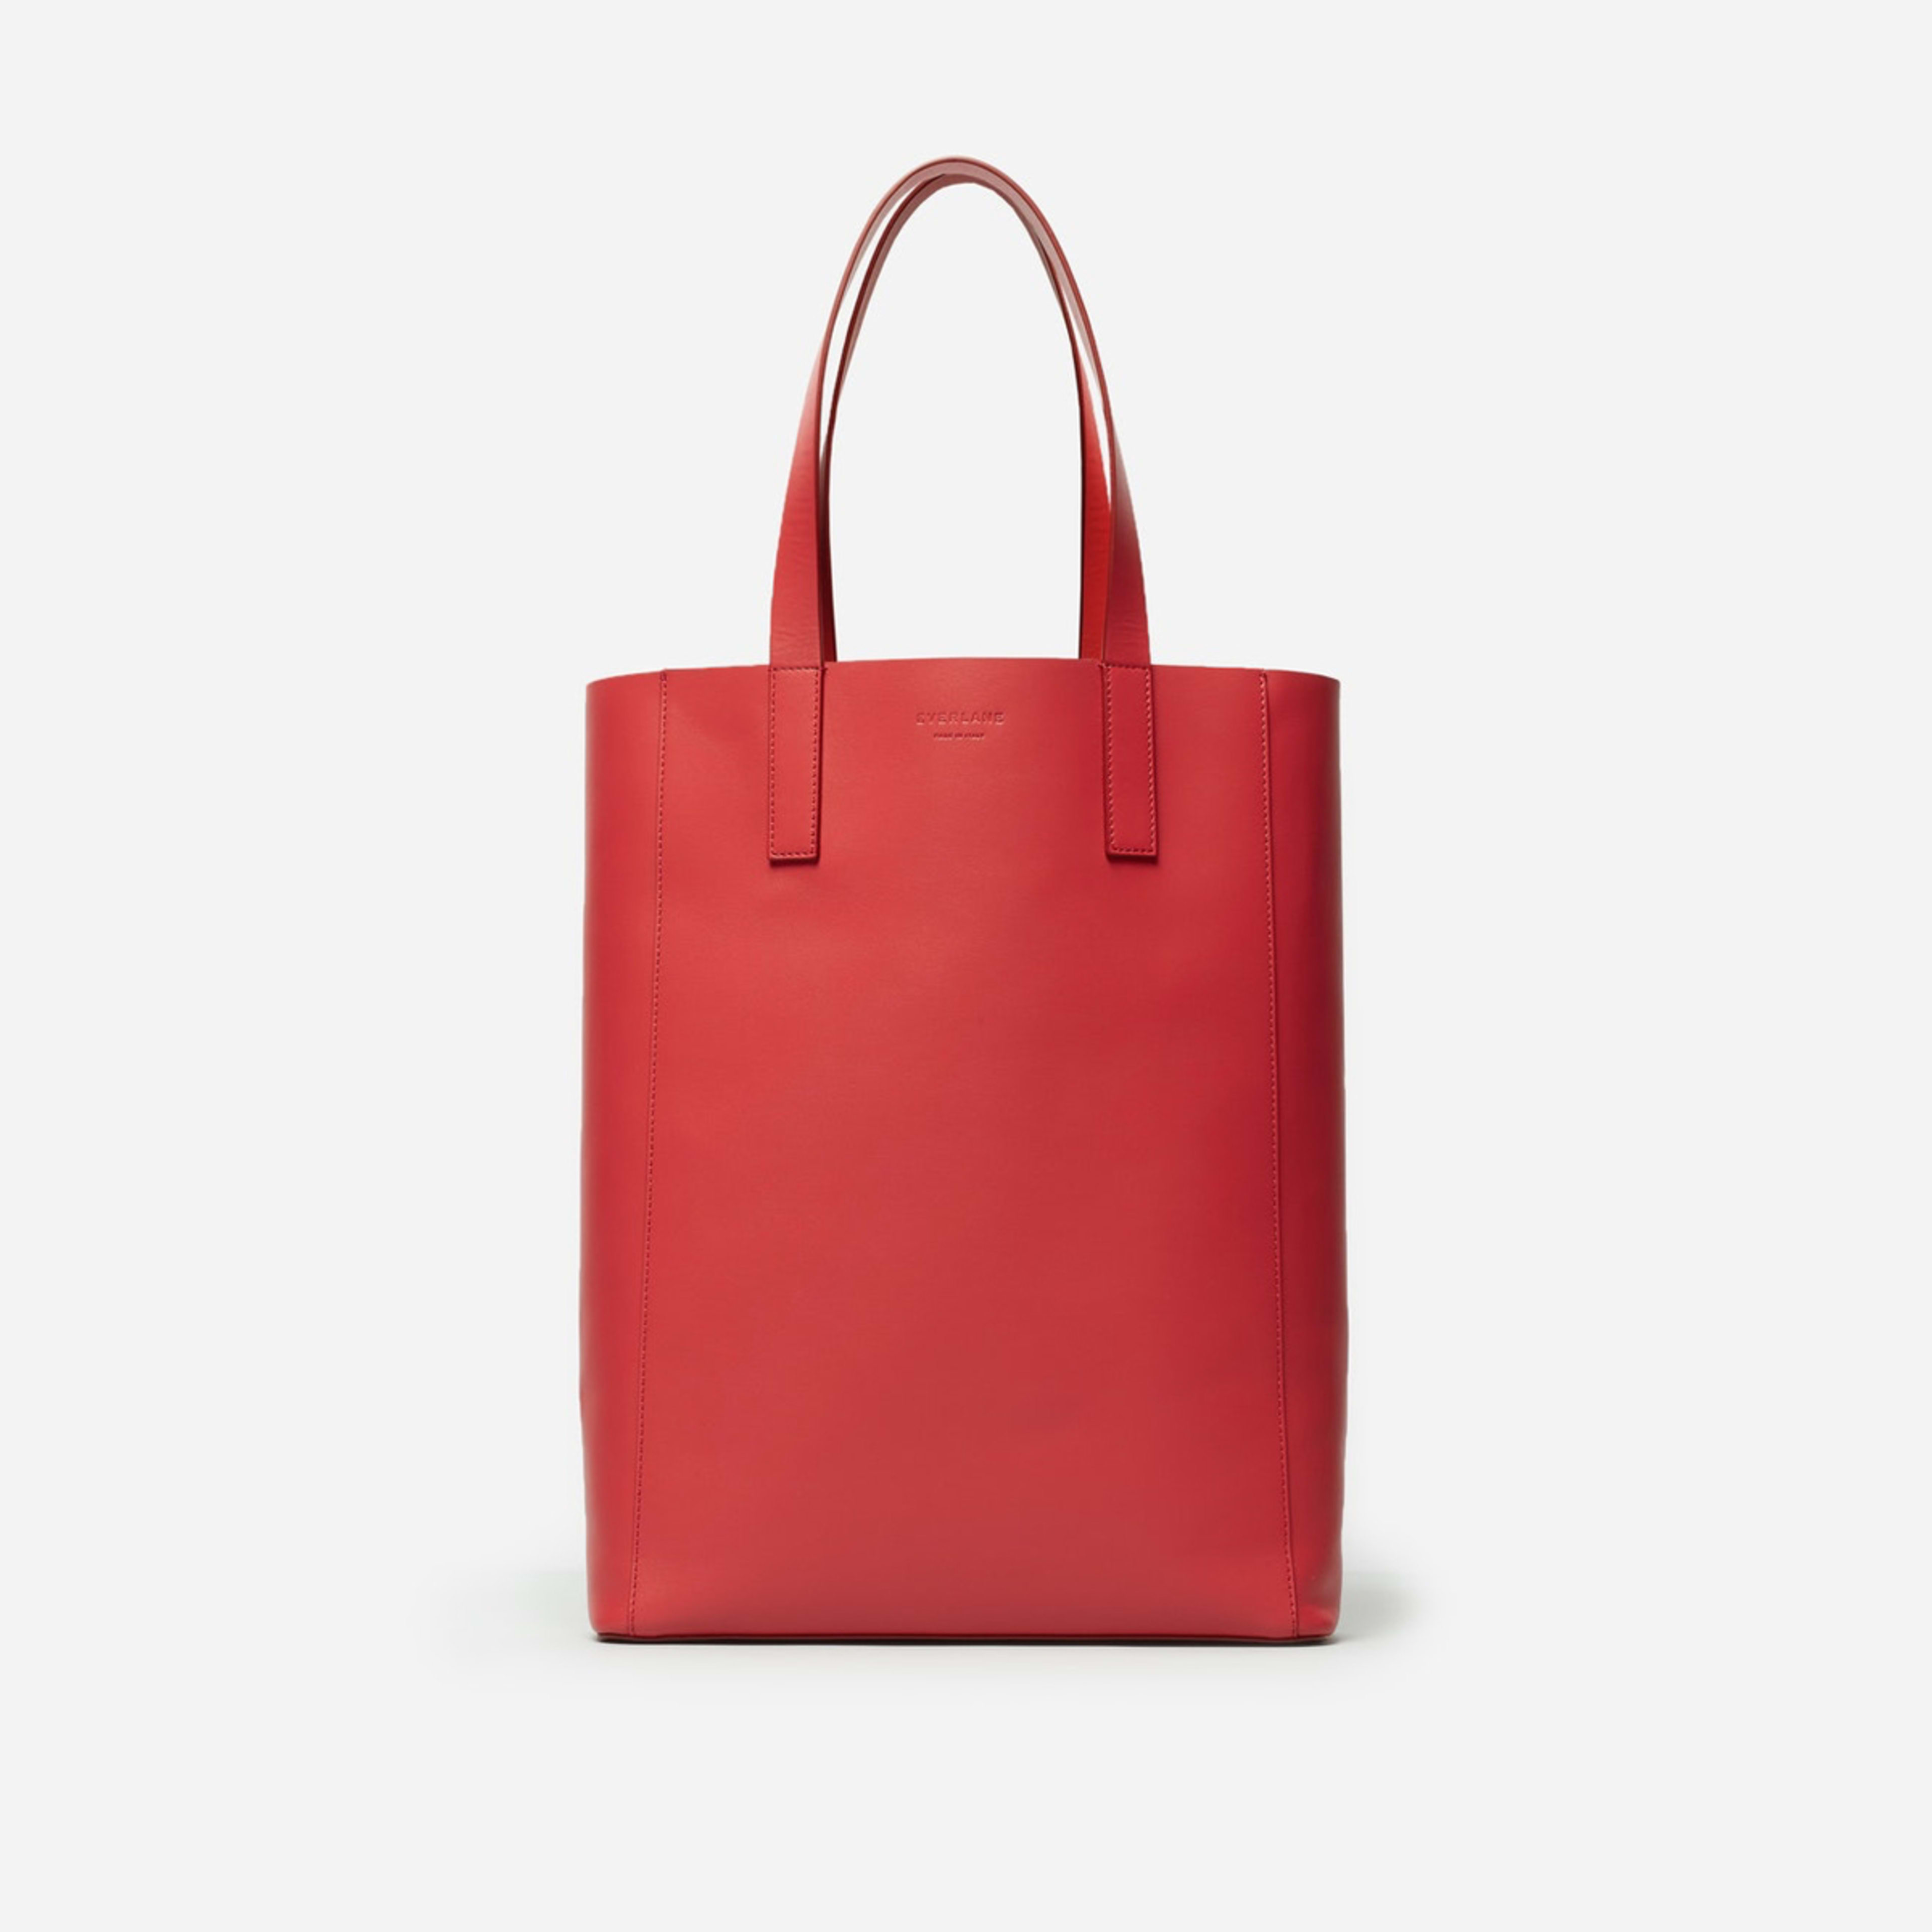 The Day Magazine Tote - Red